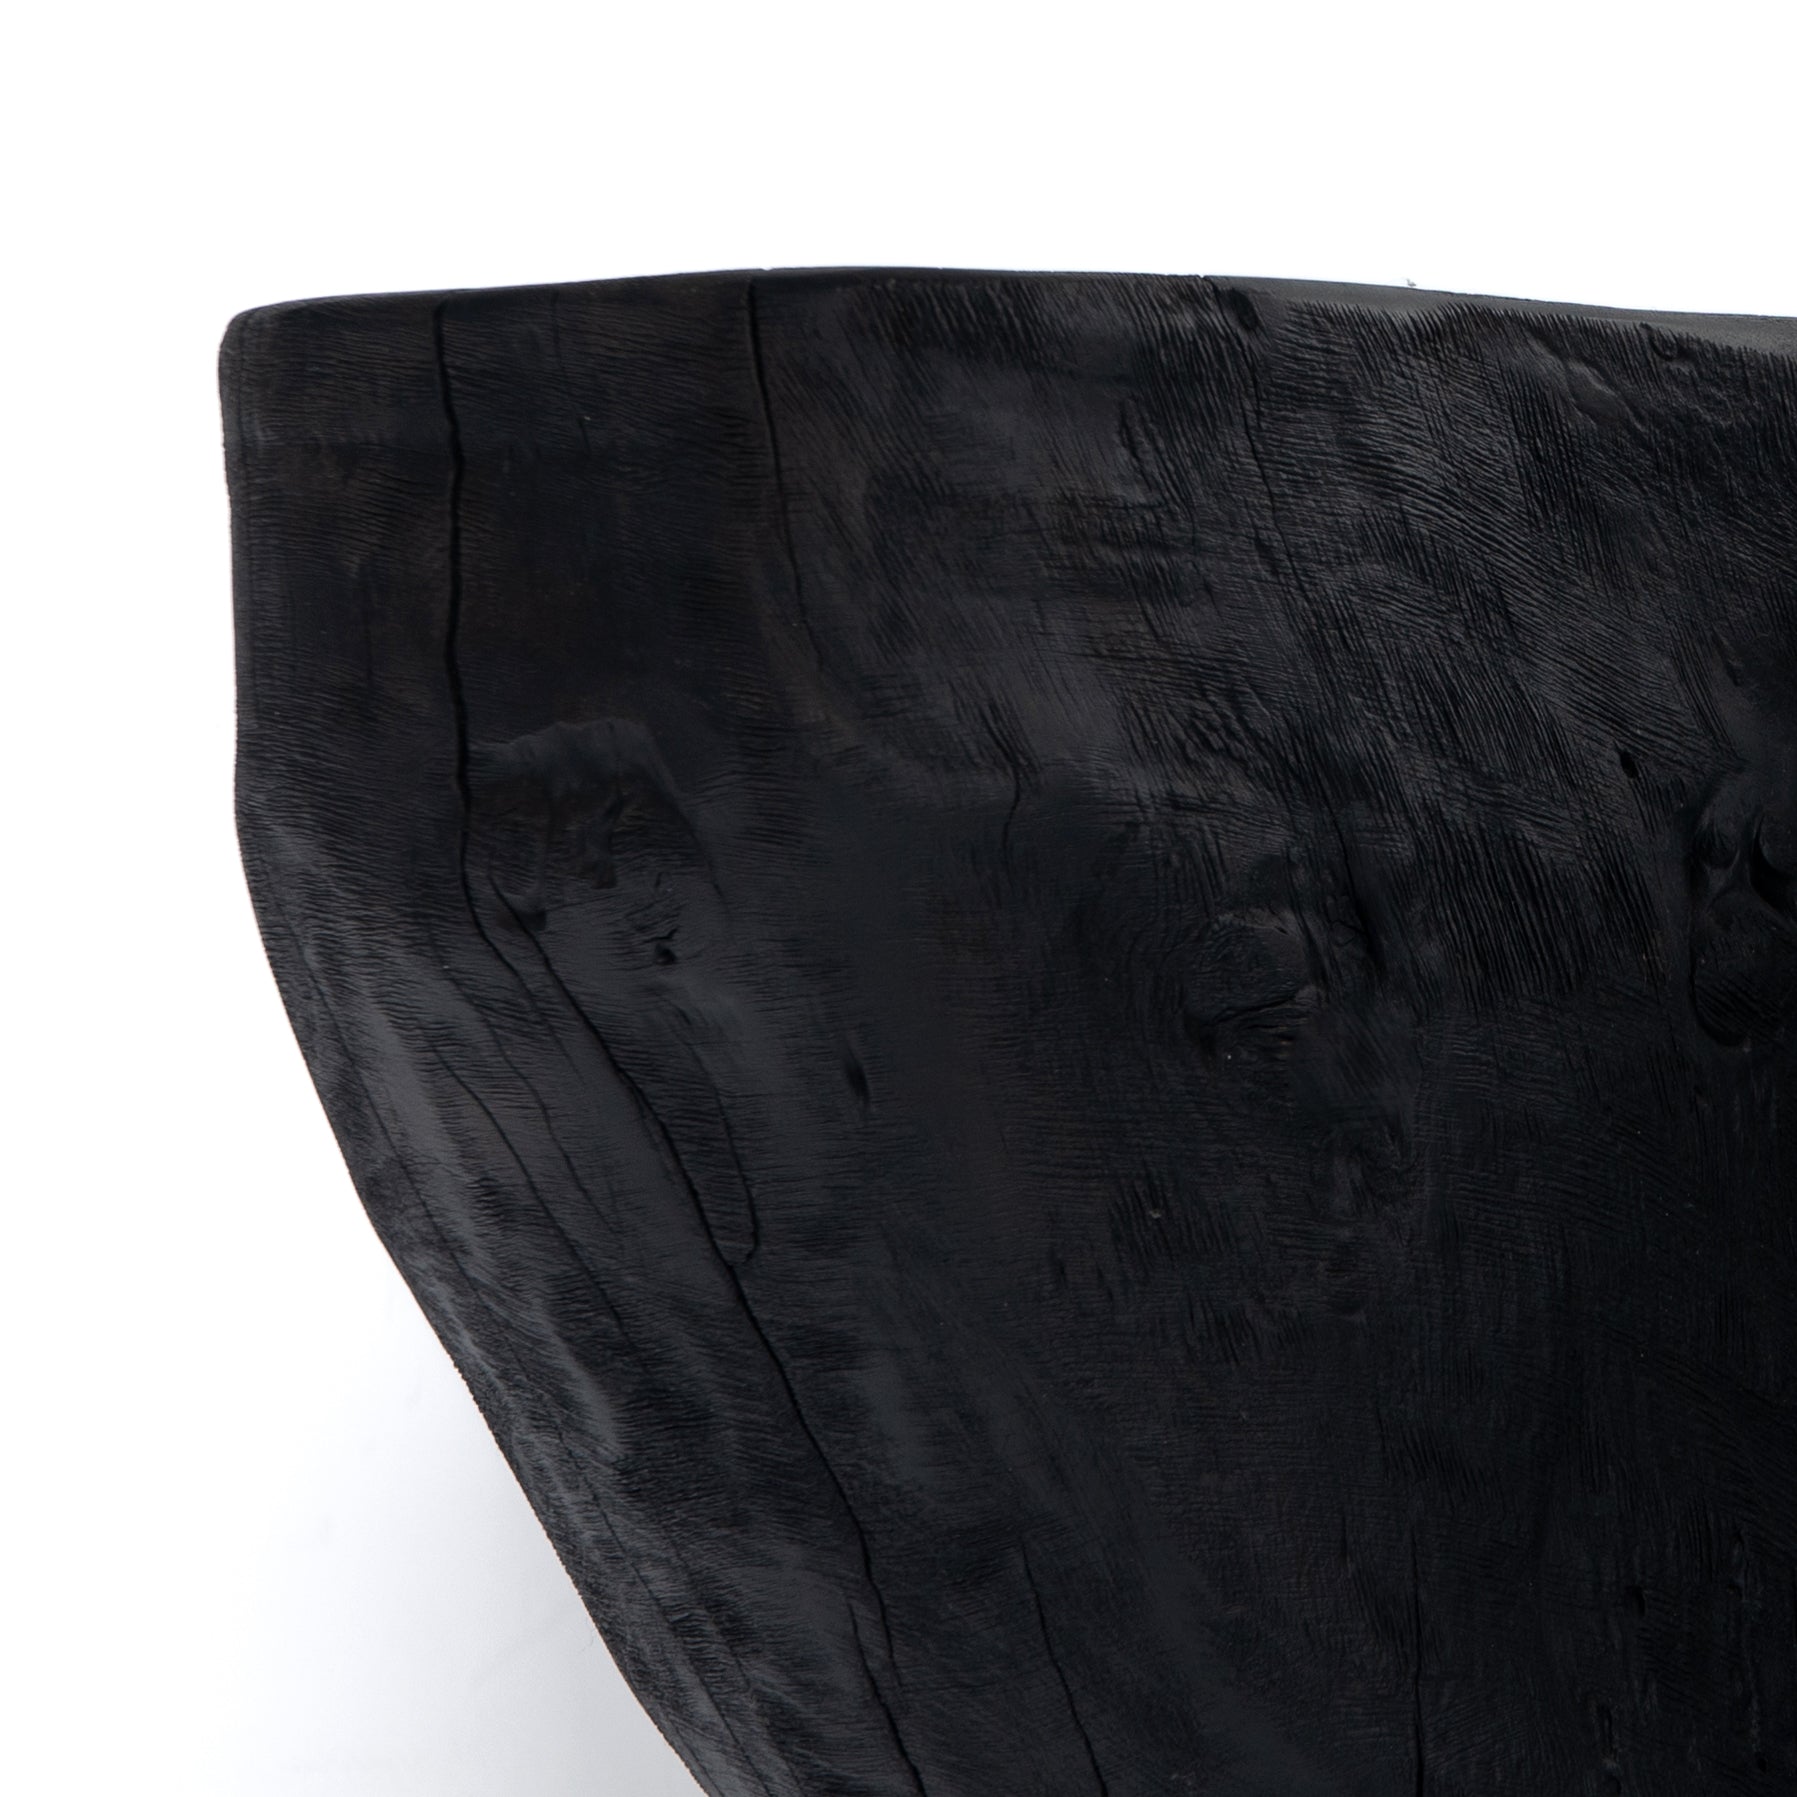 Made from solid reclaimed wood, this Live Edge Bowl - Carbonized Black brings an earthy element to any living room, kitchen, or other area. Place atop your entryway console or showcase on your favorite shelve, this bowl is sure to catch the eye of any guest. 